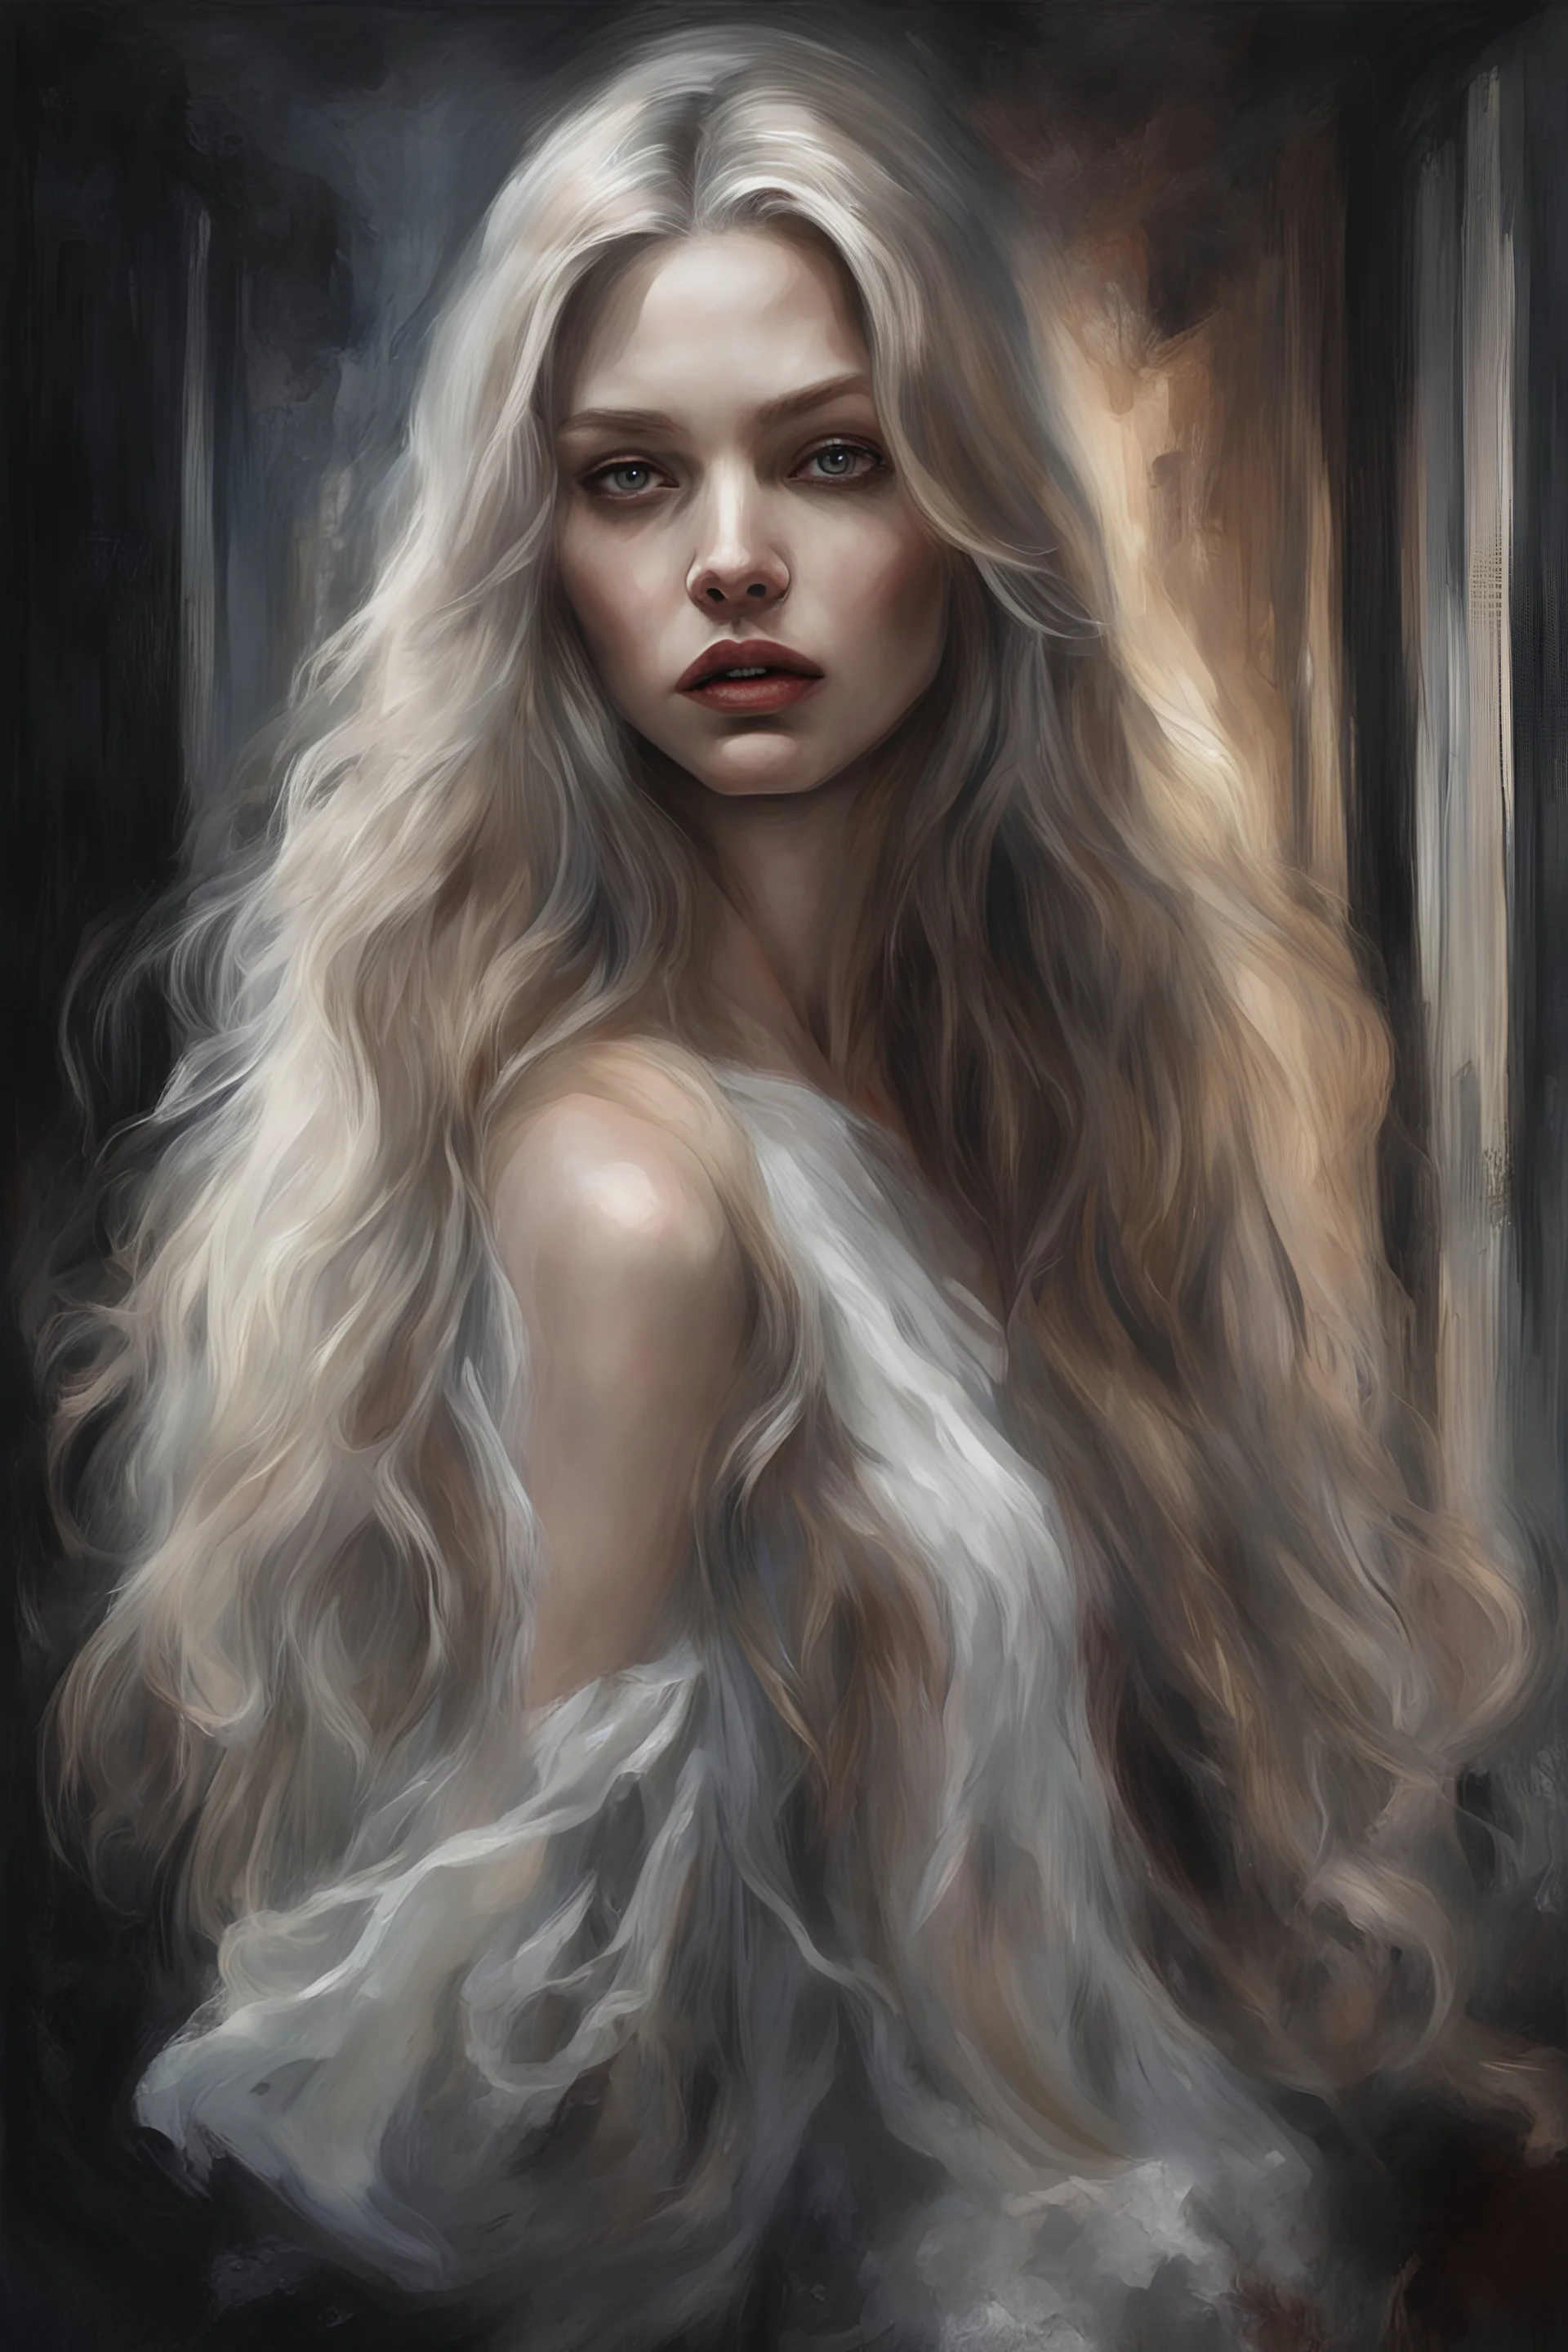 demons Alone I sit in a dark room! Vampire style Eye candy Alexandra "Sasha" Aleksejevna Luss oil Symbolism style , subject is a beautiful long hair female in she cramped apartment, he sank deep into the world of dream Heart heavy, mind full of worries.